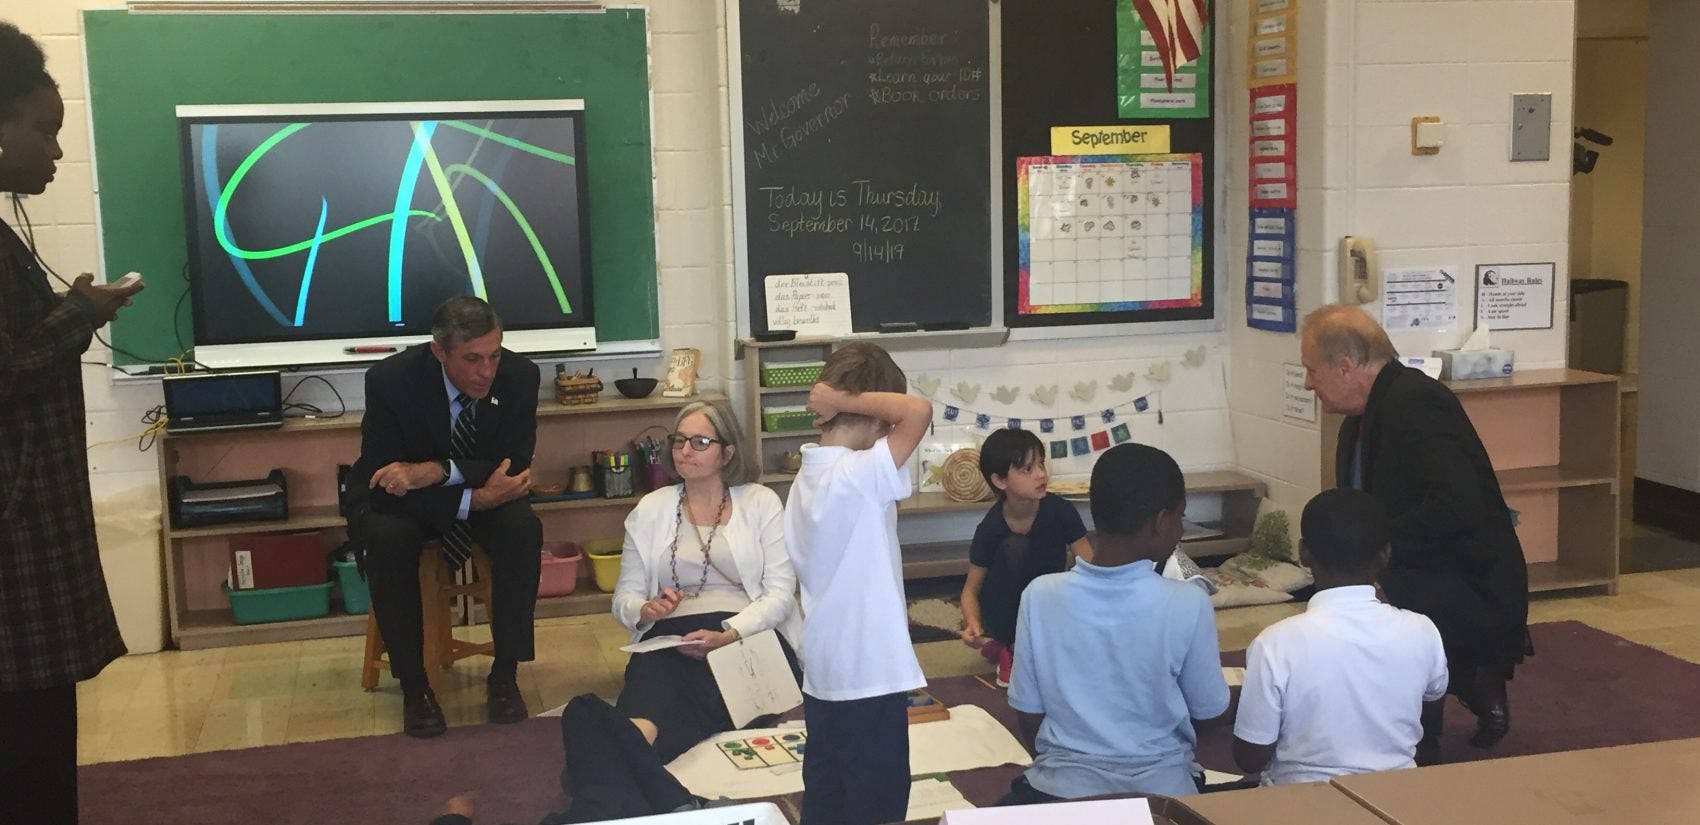 Gov. John Carney (seated) recently visited Bancroft Elementary, which has barely one-third of its seats filled. Carney said Christina School District leaders must make 